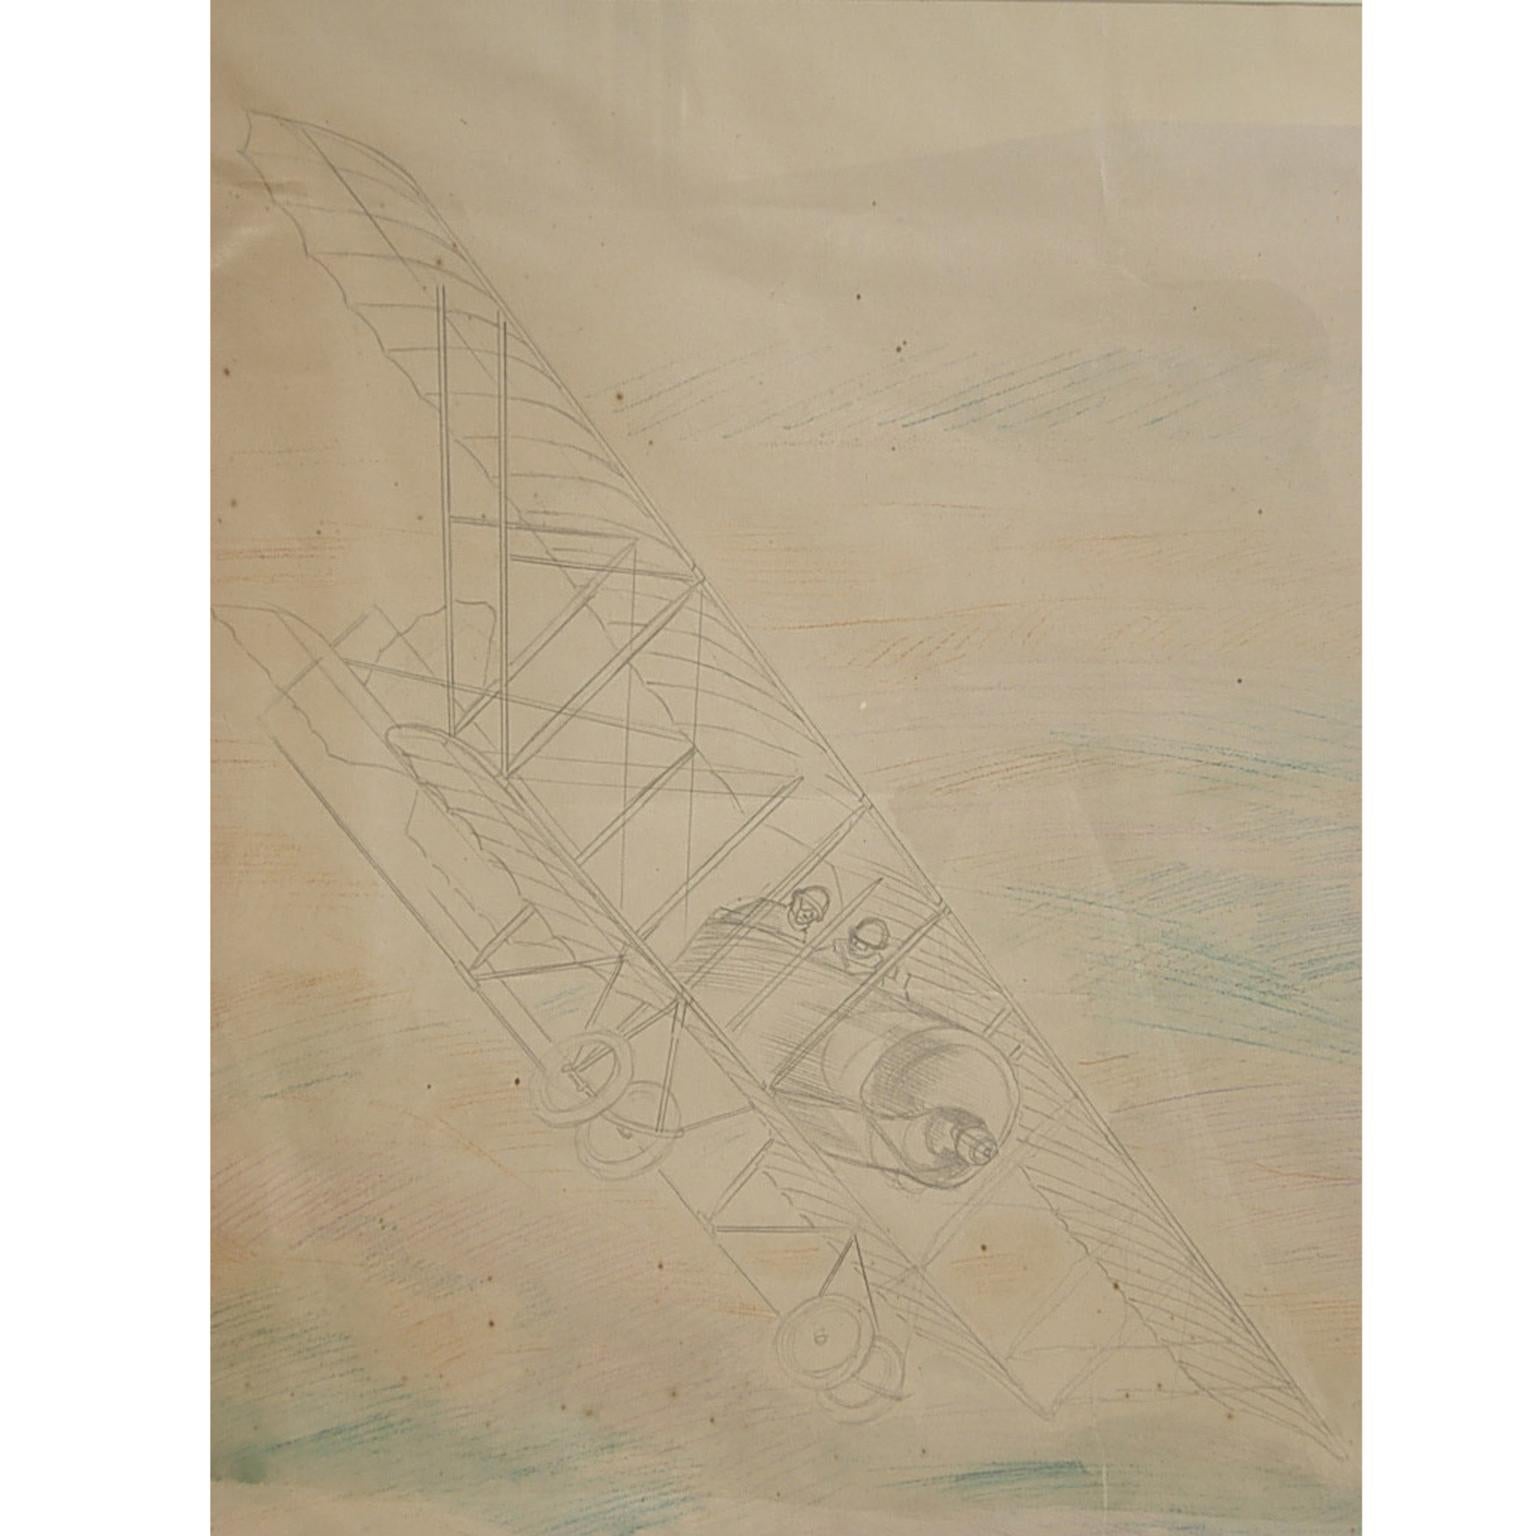 Pencil-drawing by Riccardo Cavigioli in the early 1920s depicting a two-seat biplane airplane for reconnaissance Caudron G III, French production of 1914, equipped with a Le Rhone 80 hp engine. Aircraft lacking in speed and effective defence,